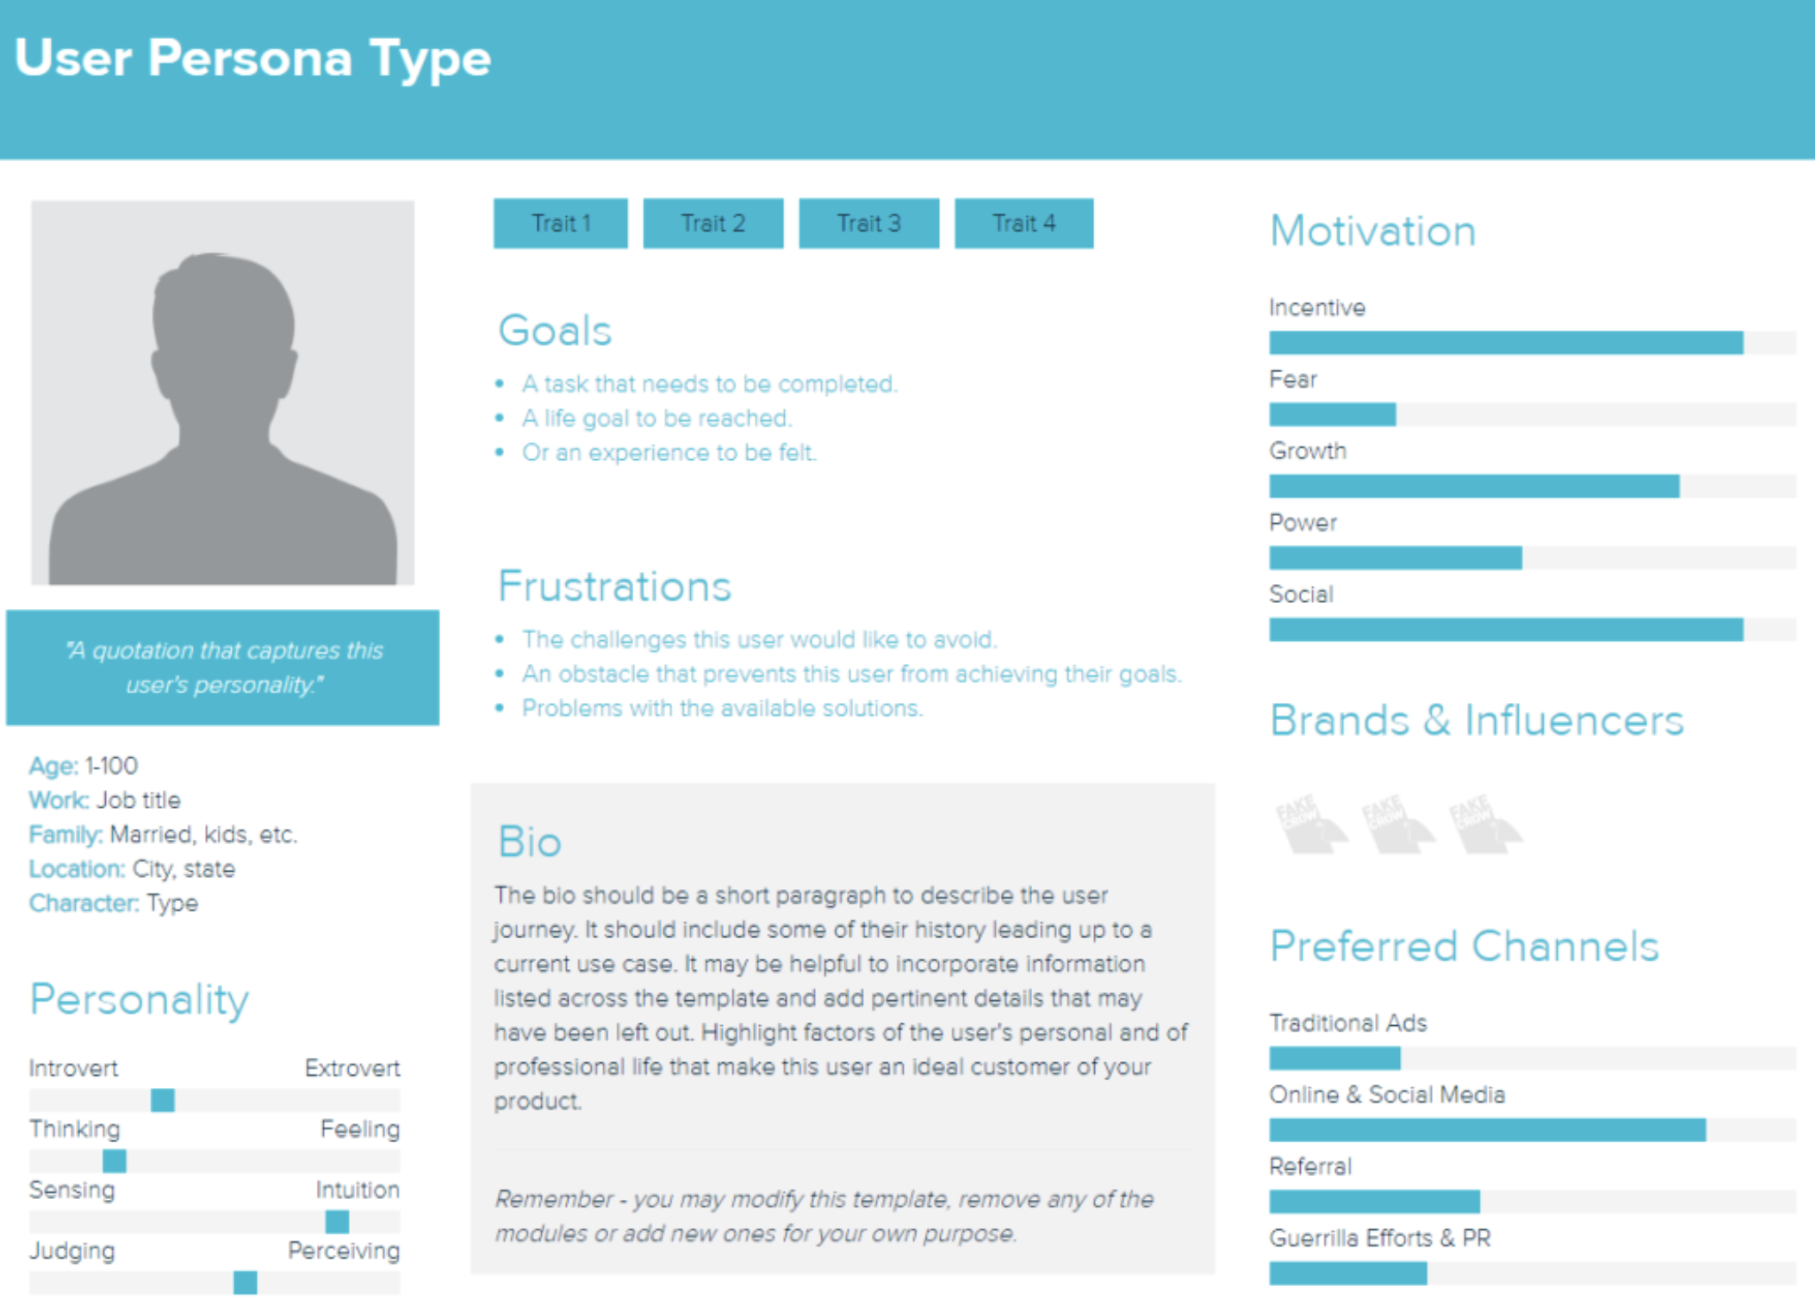 Example of a user persona type. The image different information like bio, frustrations, motivation and preferred channels.